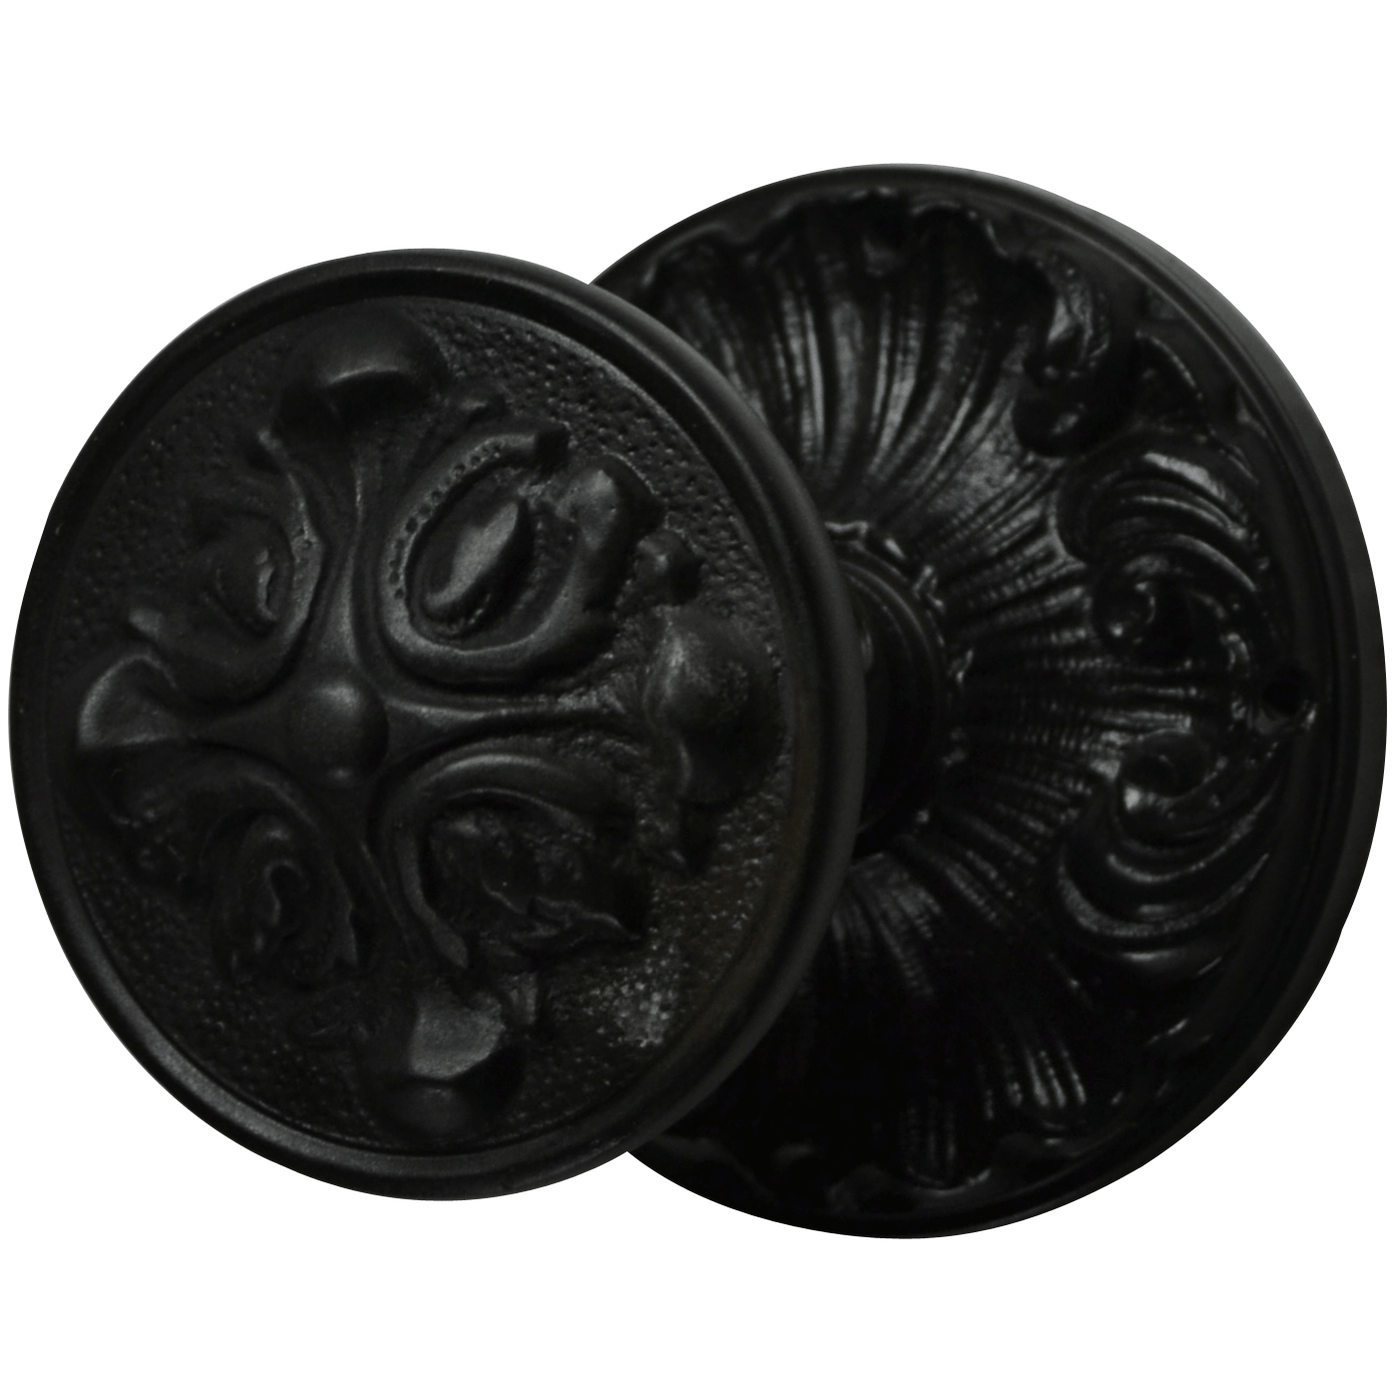 Romanesque Rosette Door Set with Romanesque Door Knobs (Several Finishes Available)